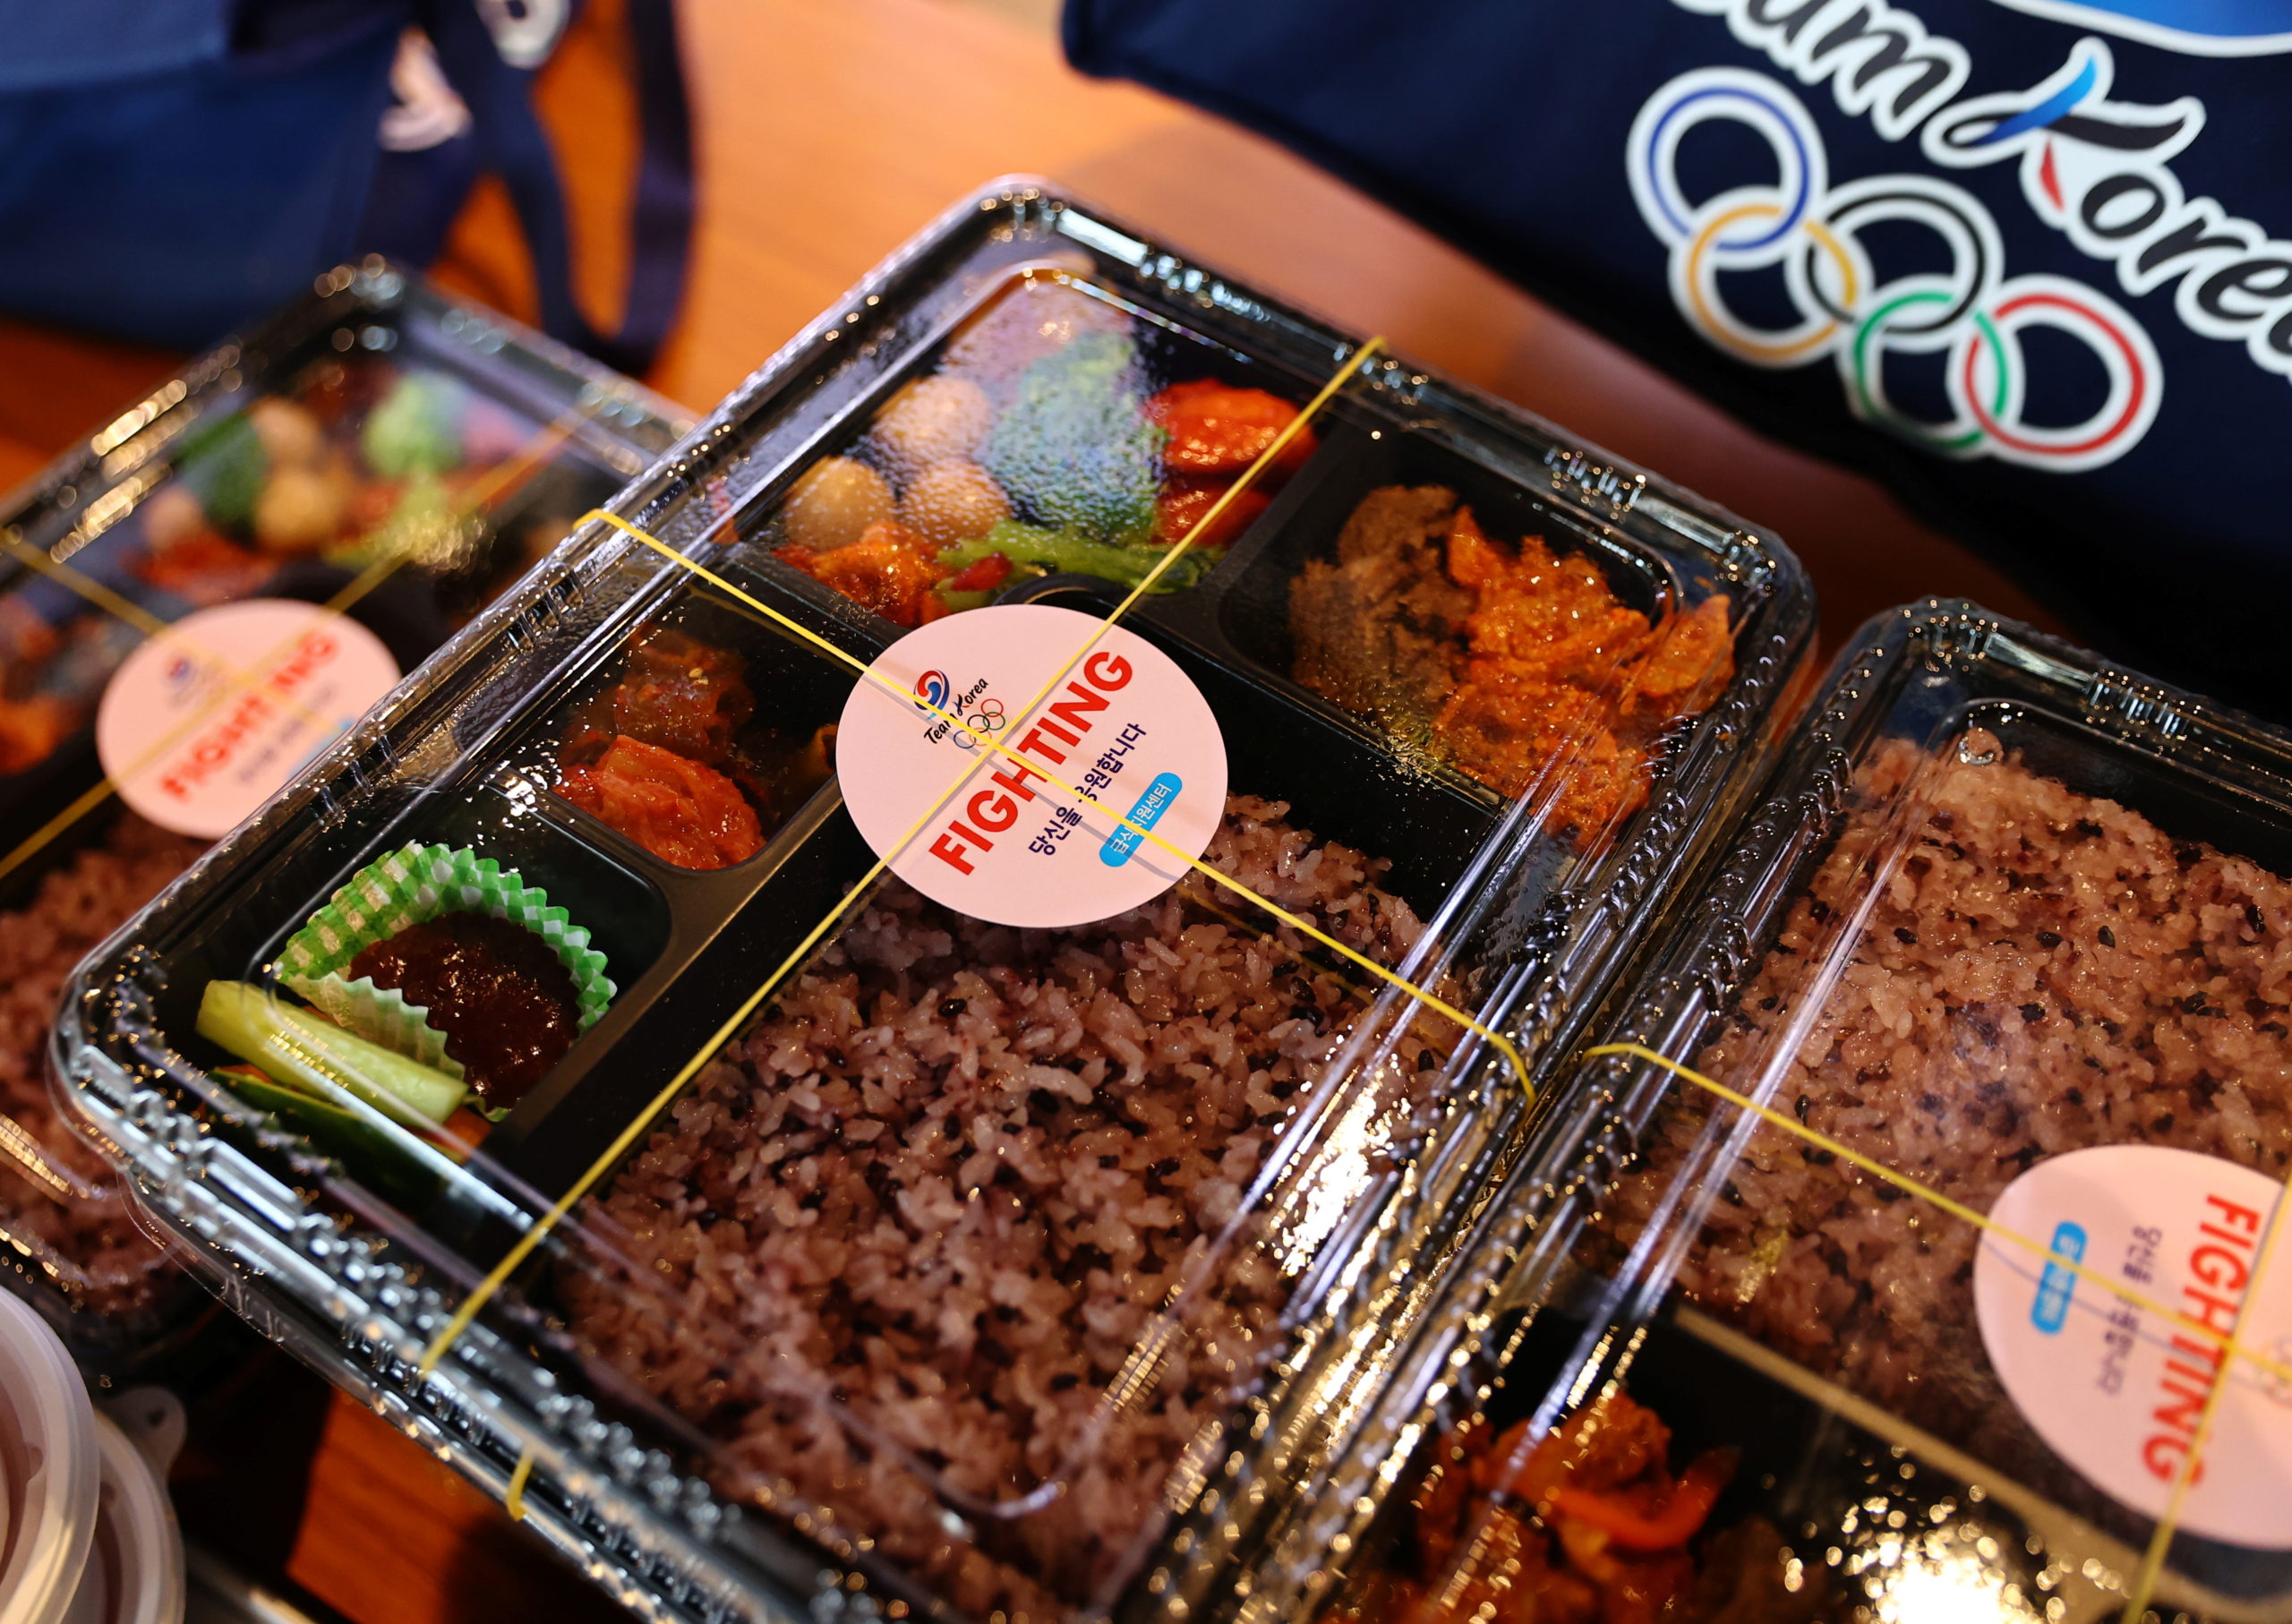 Boxed meals for South Korean Tokyo 2020 Olympic Games athletes are pictured at a hotel in Urayasu, Chiba Prefecture, Japan, July 26, 2021.